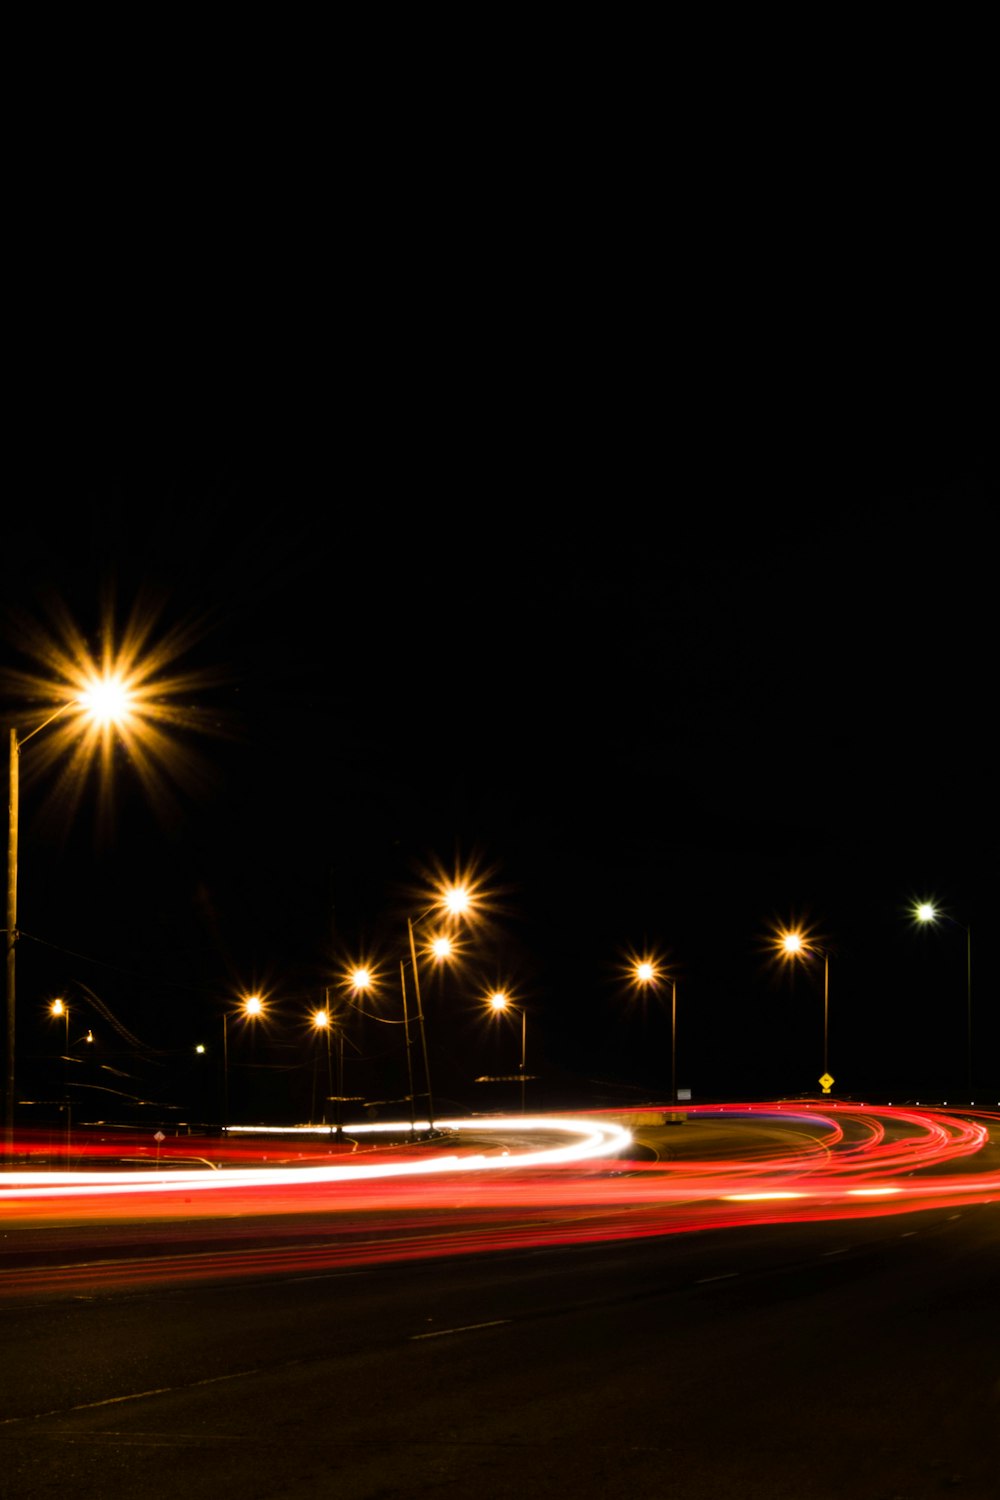 long exposure photography of road during nighttime